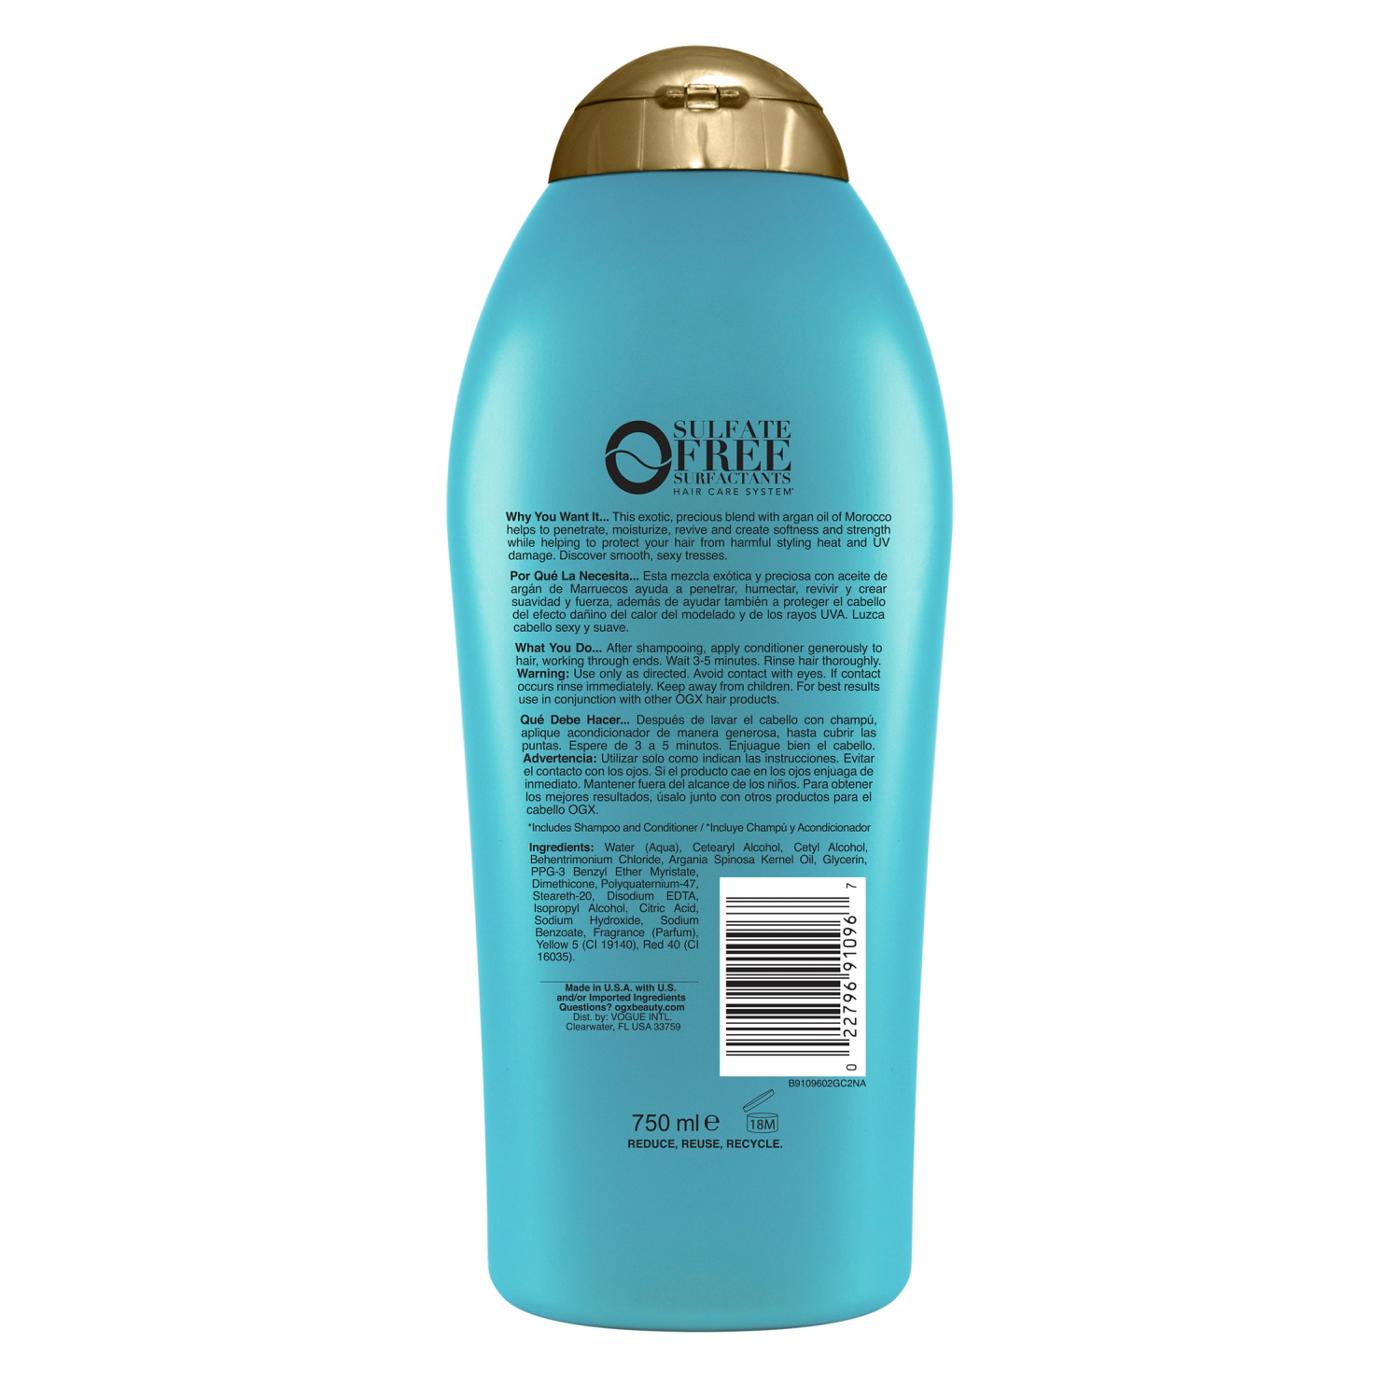 OGX Salon Size Renewing + Argan Oil of Morocco Conditioner; image 6 of 6